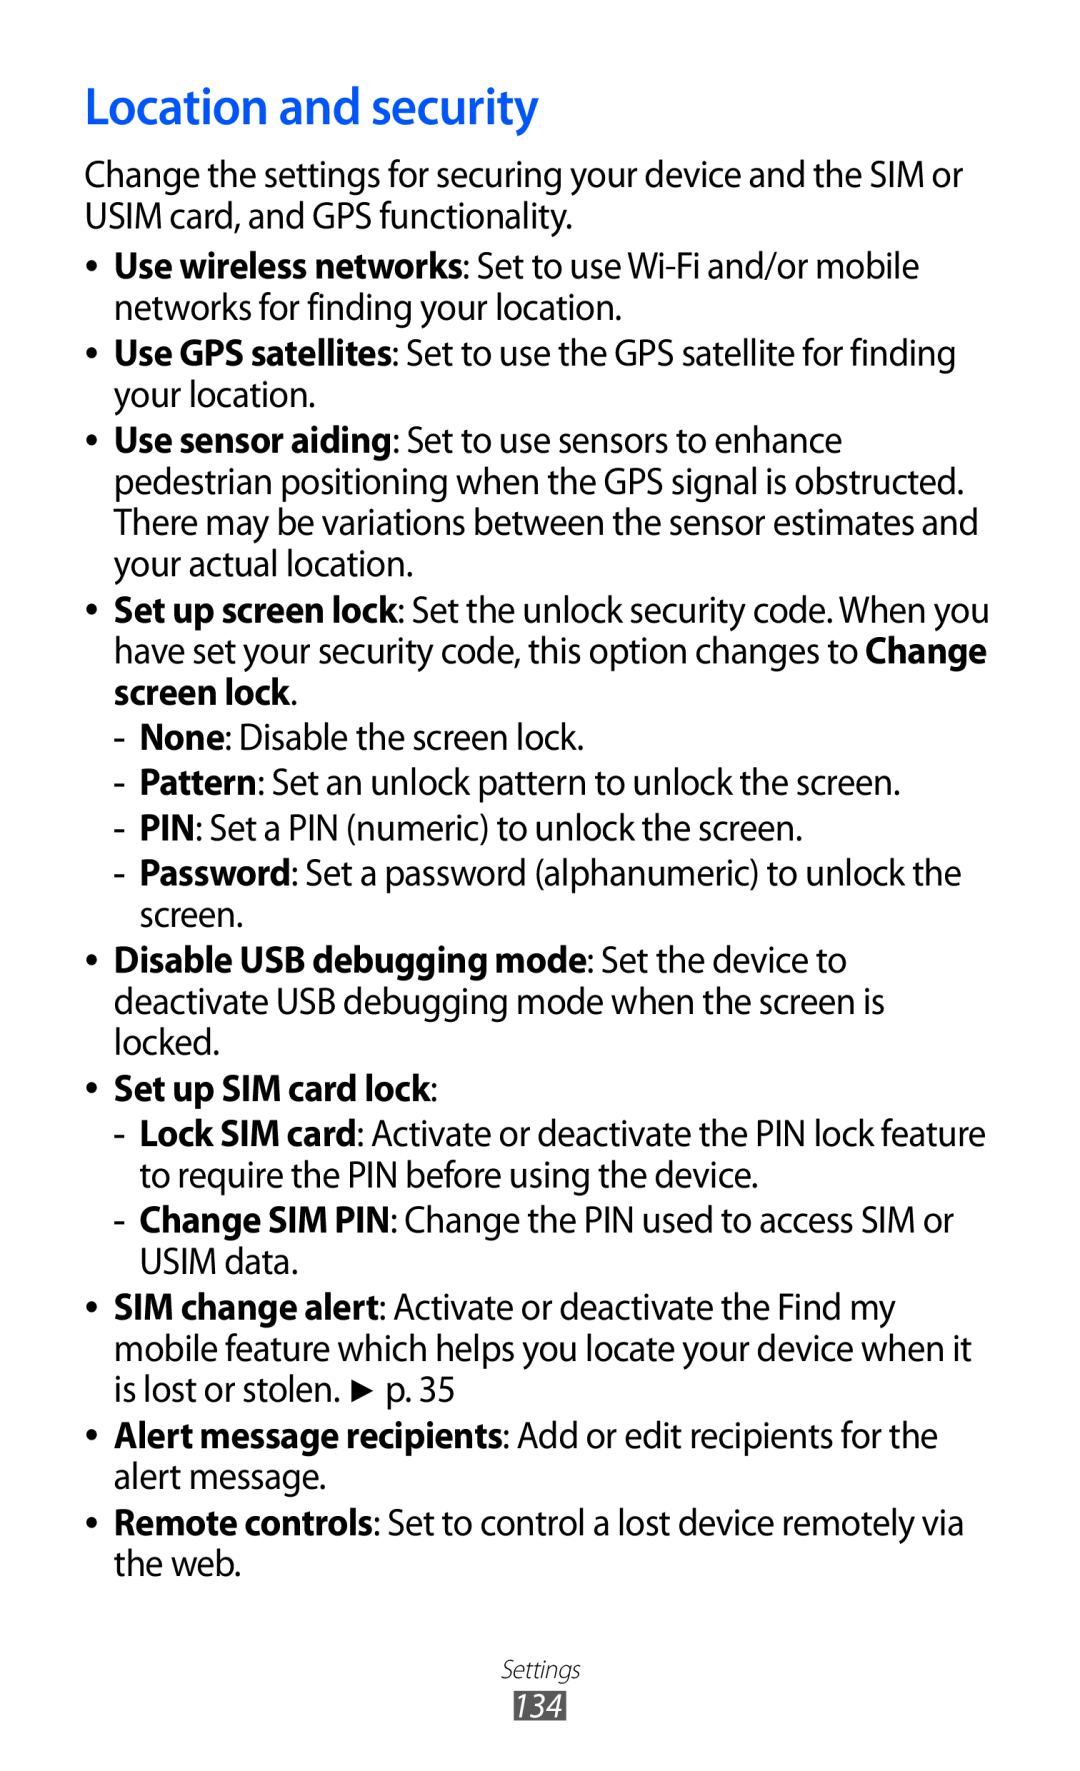 Samsung GT-I9070 user manual Location and security, Set up SIM card lock 